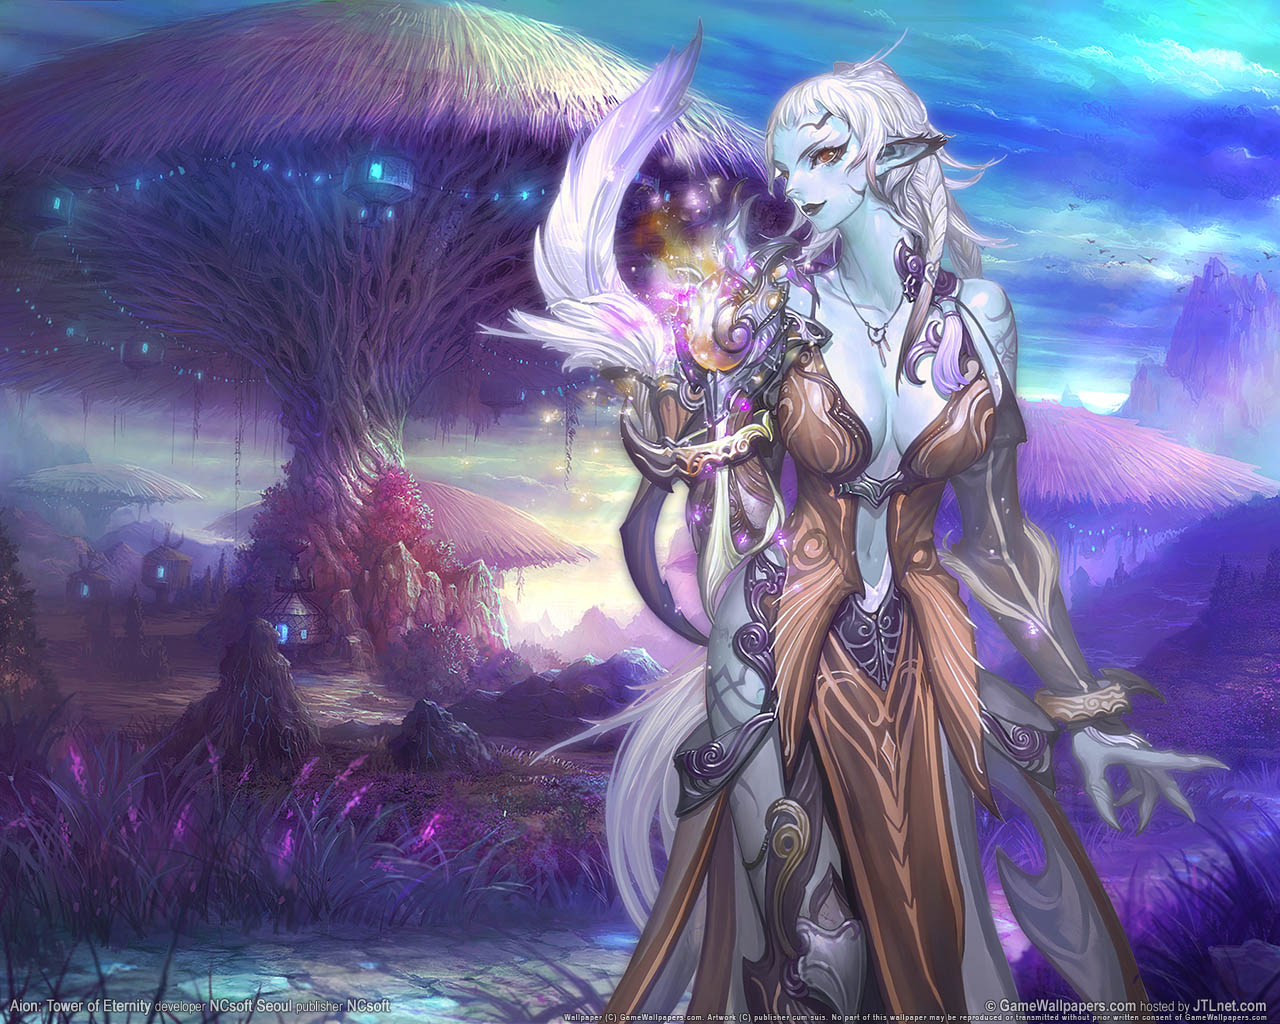 Aion%253A Tower of Eternity wallpaper 10 1280x1024